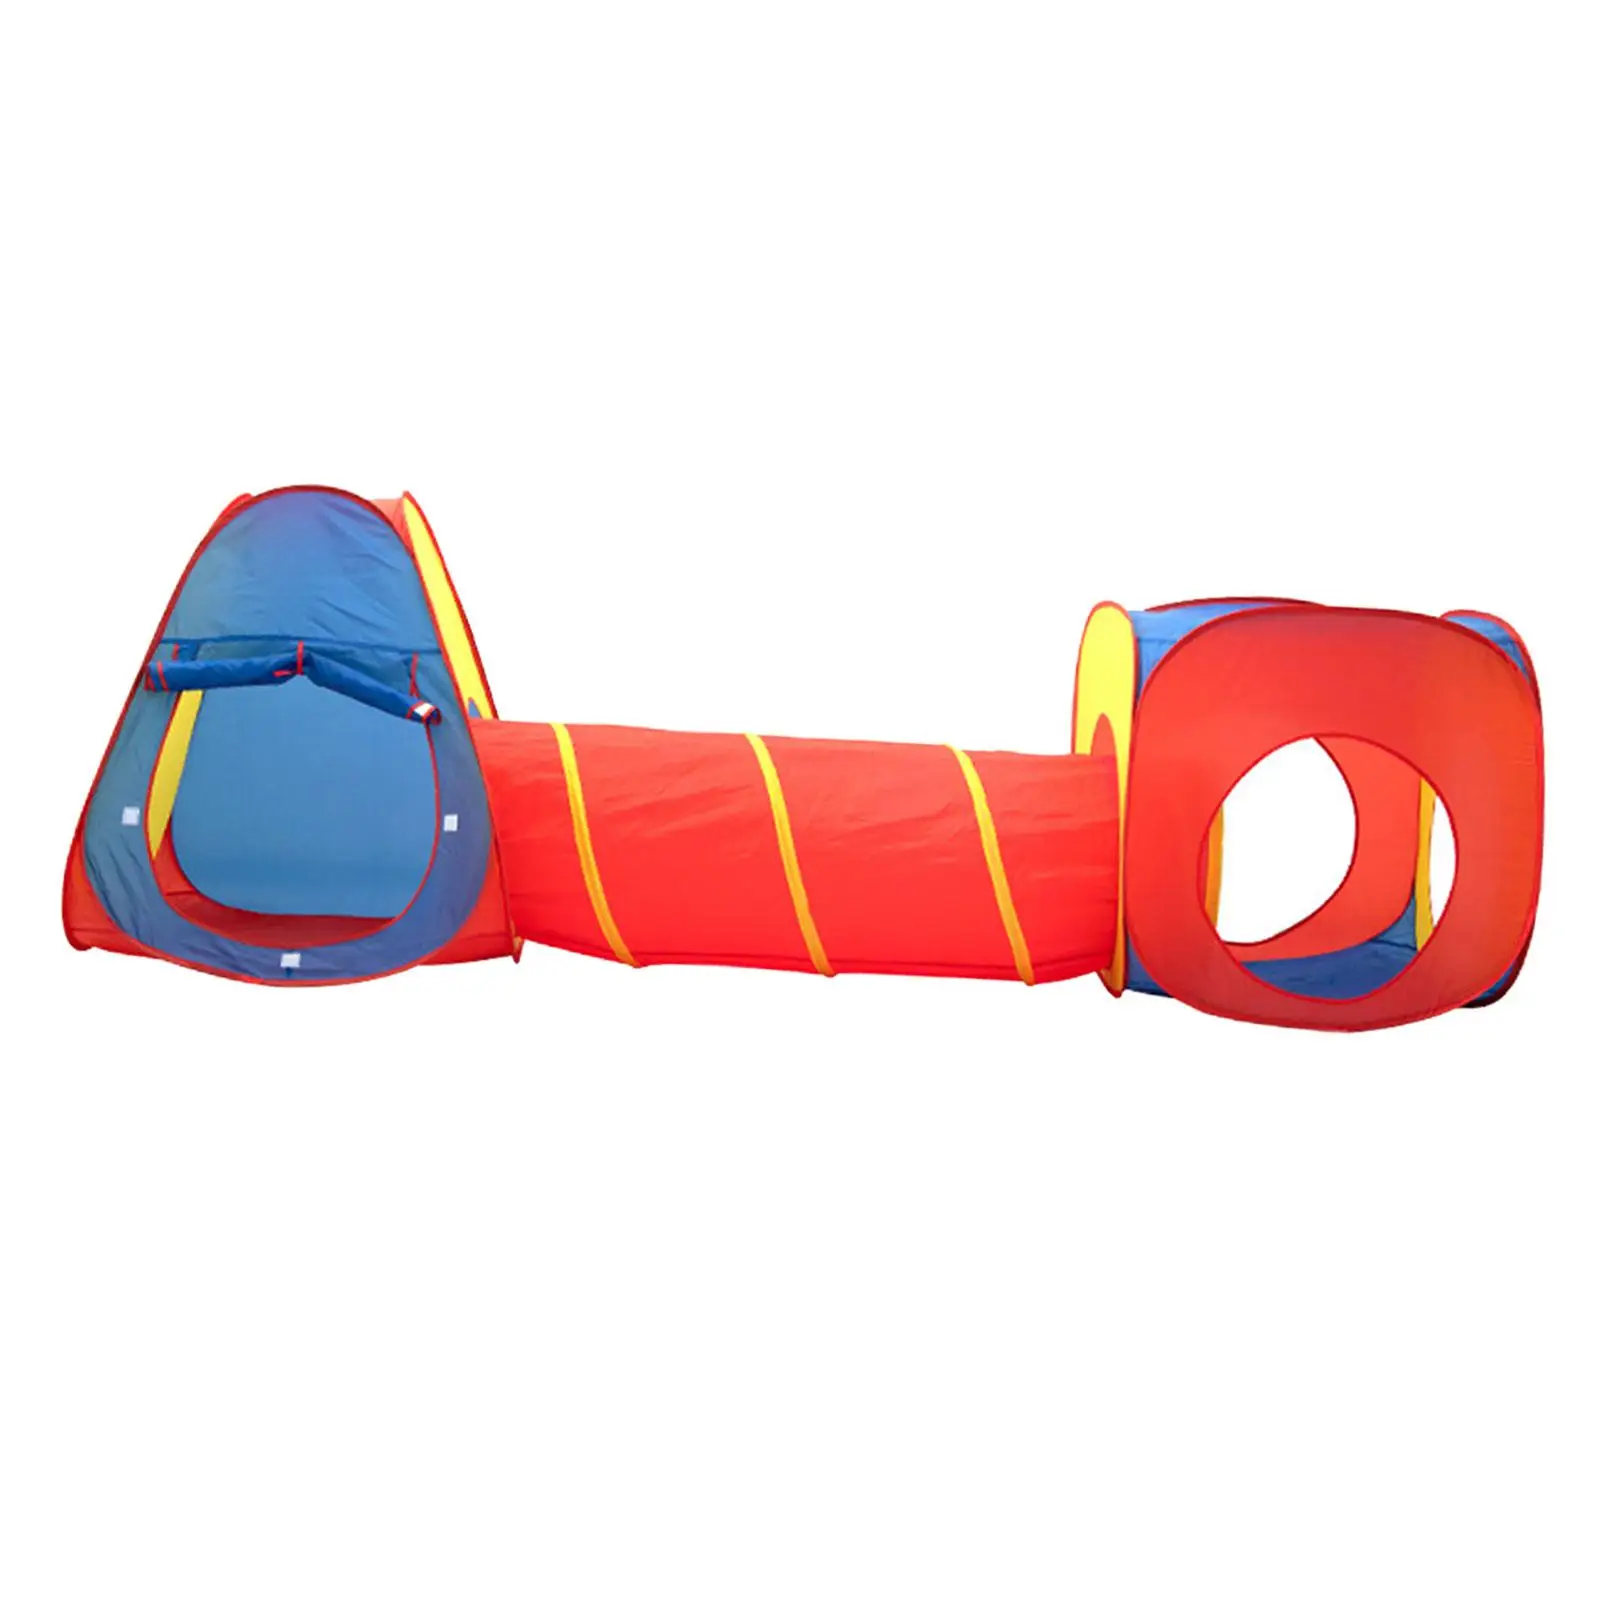 Kids Play Tents with Tunnels Indoor Outdoor Games for Park, Playground